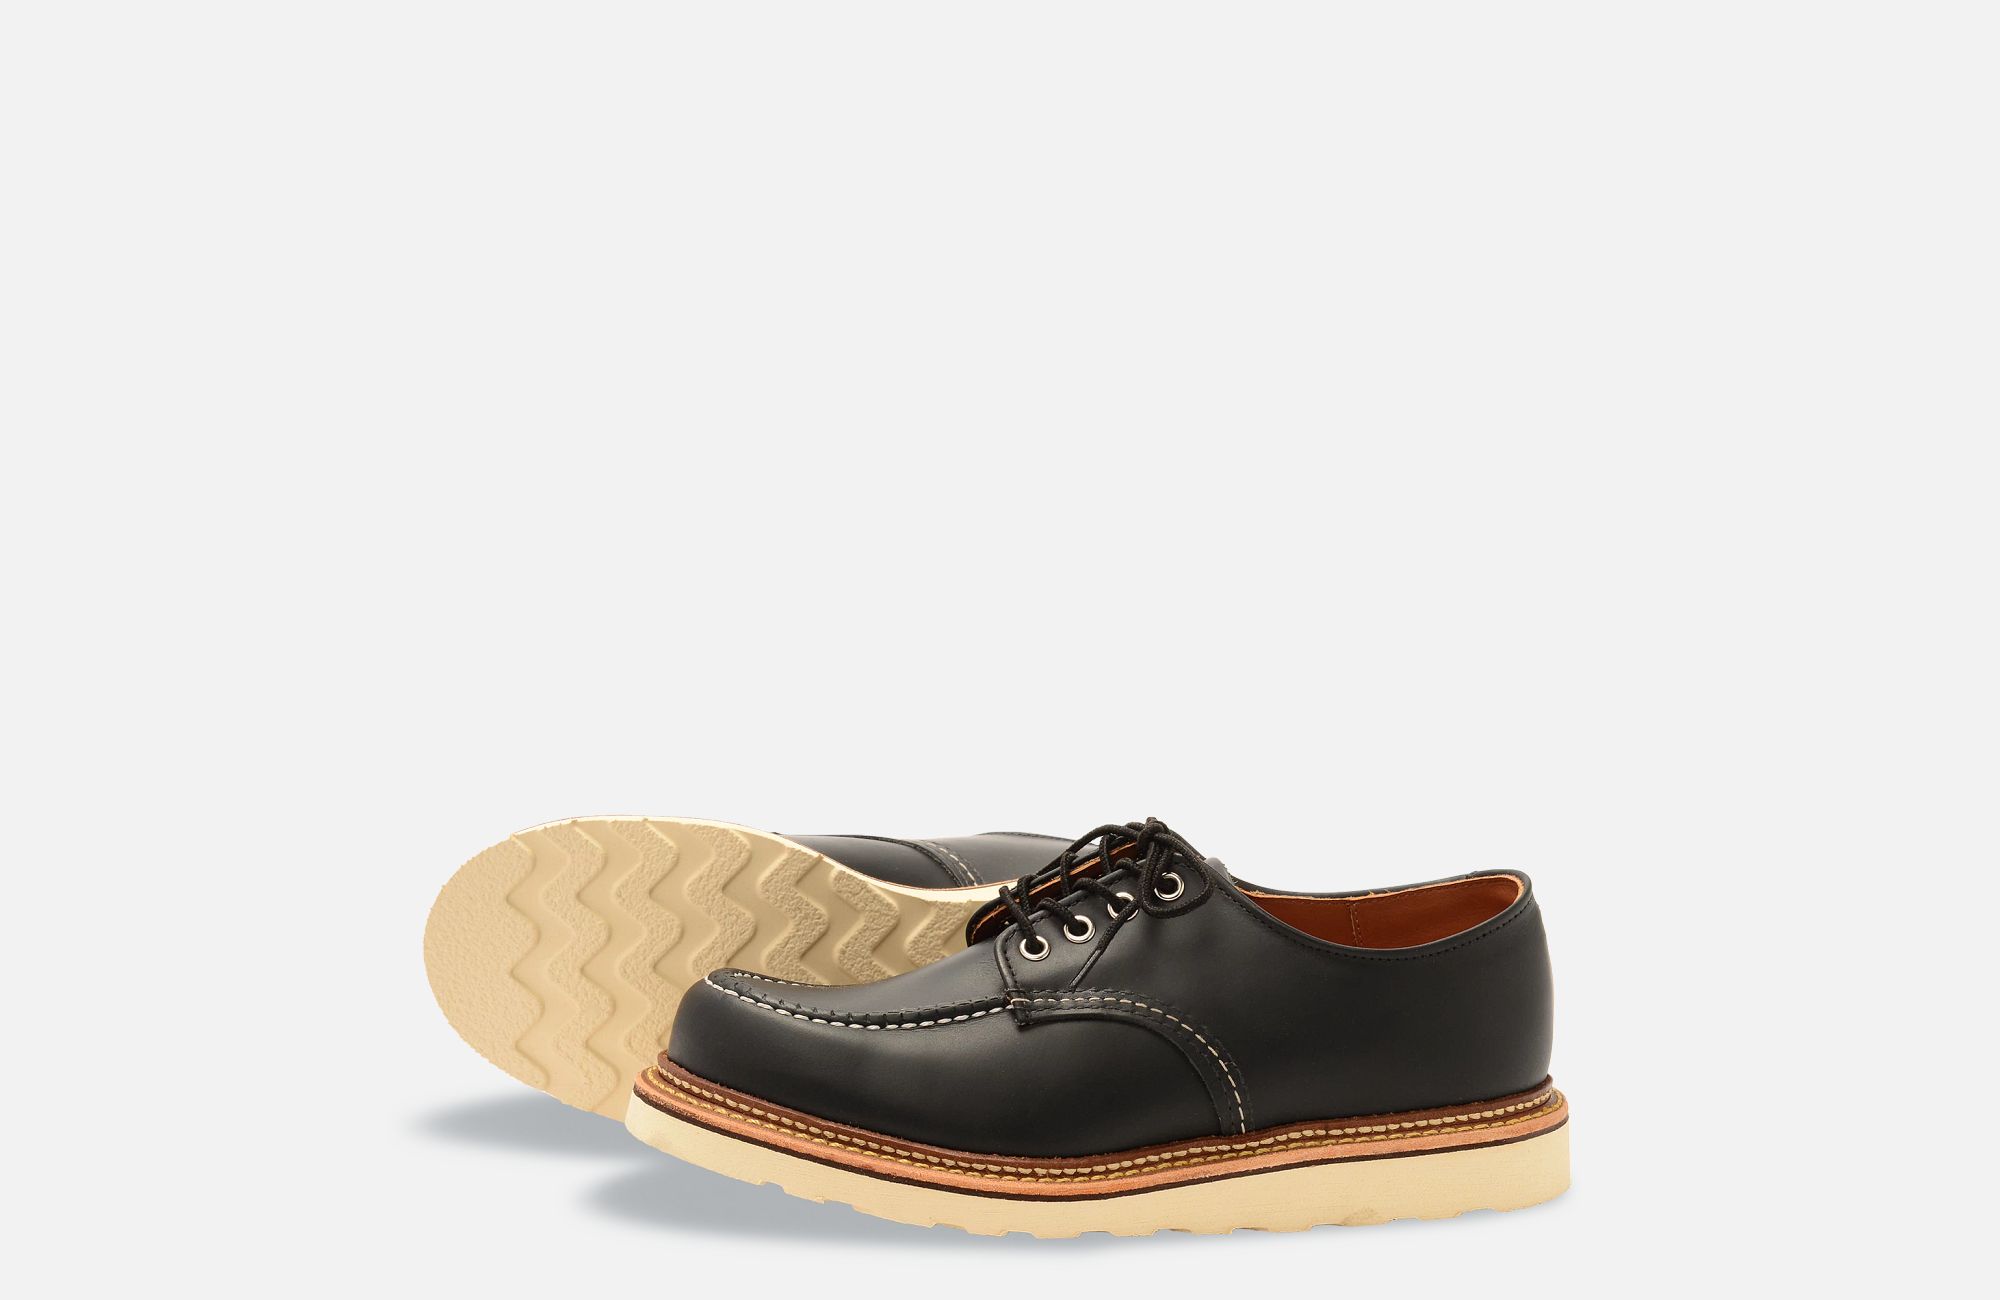 Men's Classic Oxford in Black Leather 8106 | RedWing